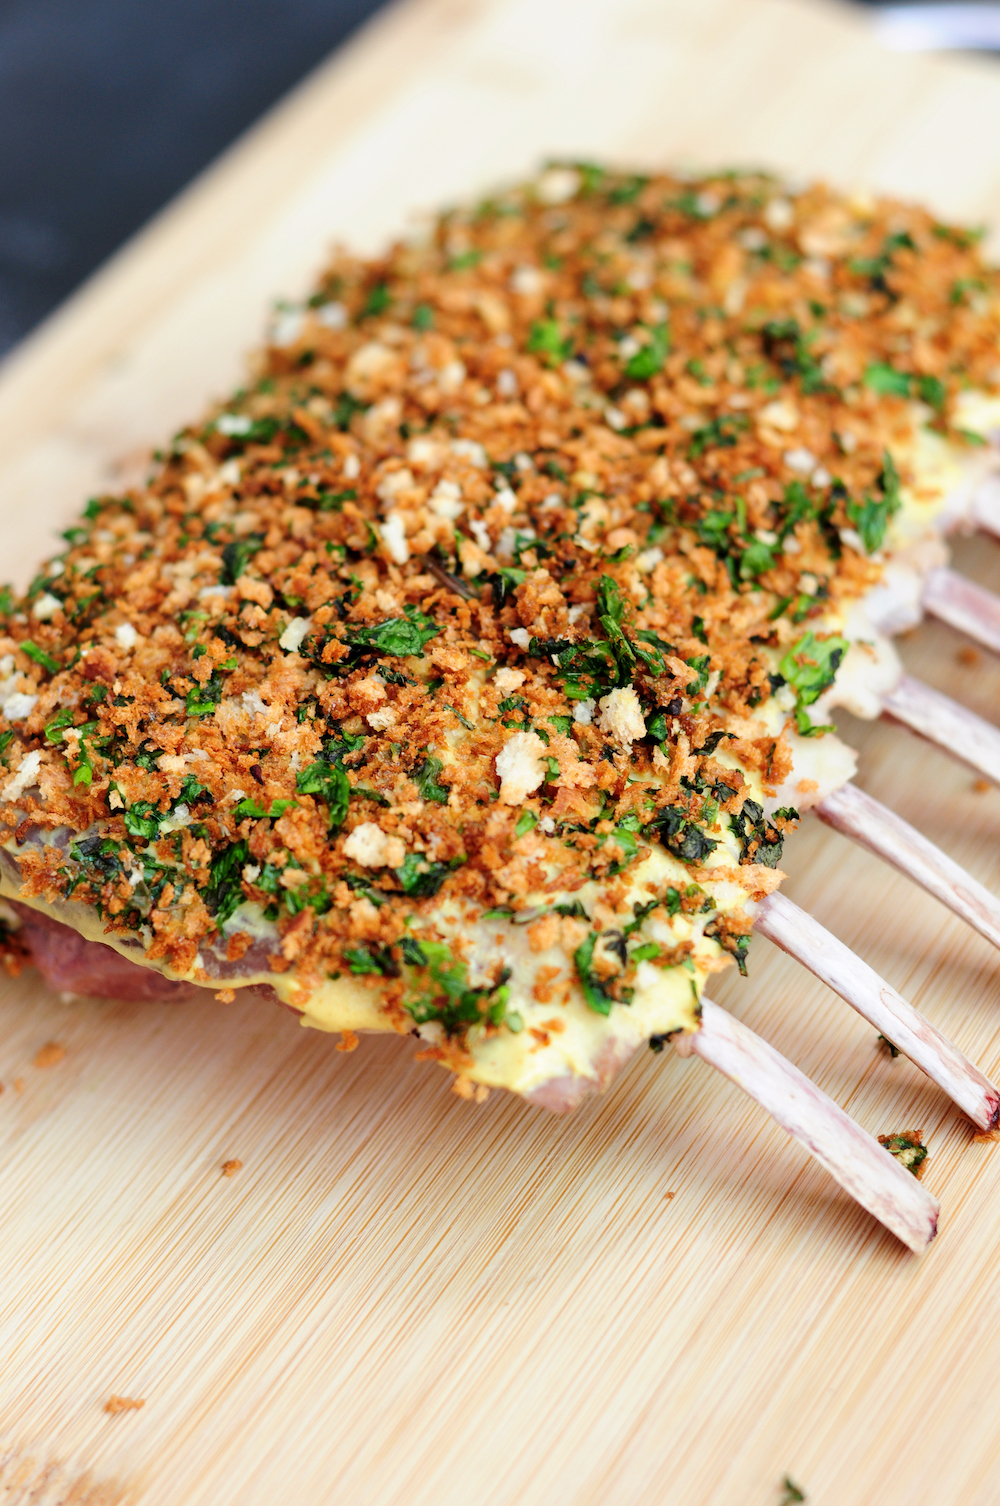 Sous Vide Rack of Lamb with Green Herb Crust